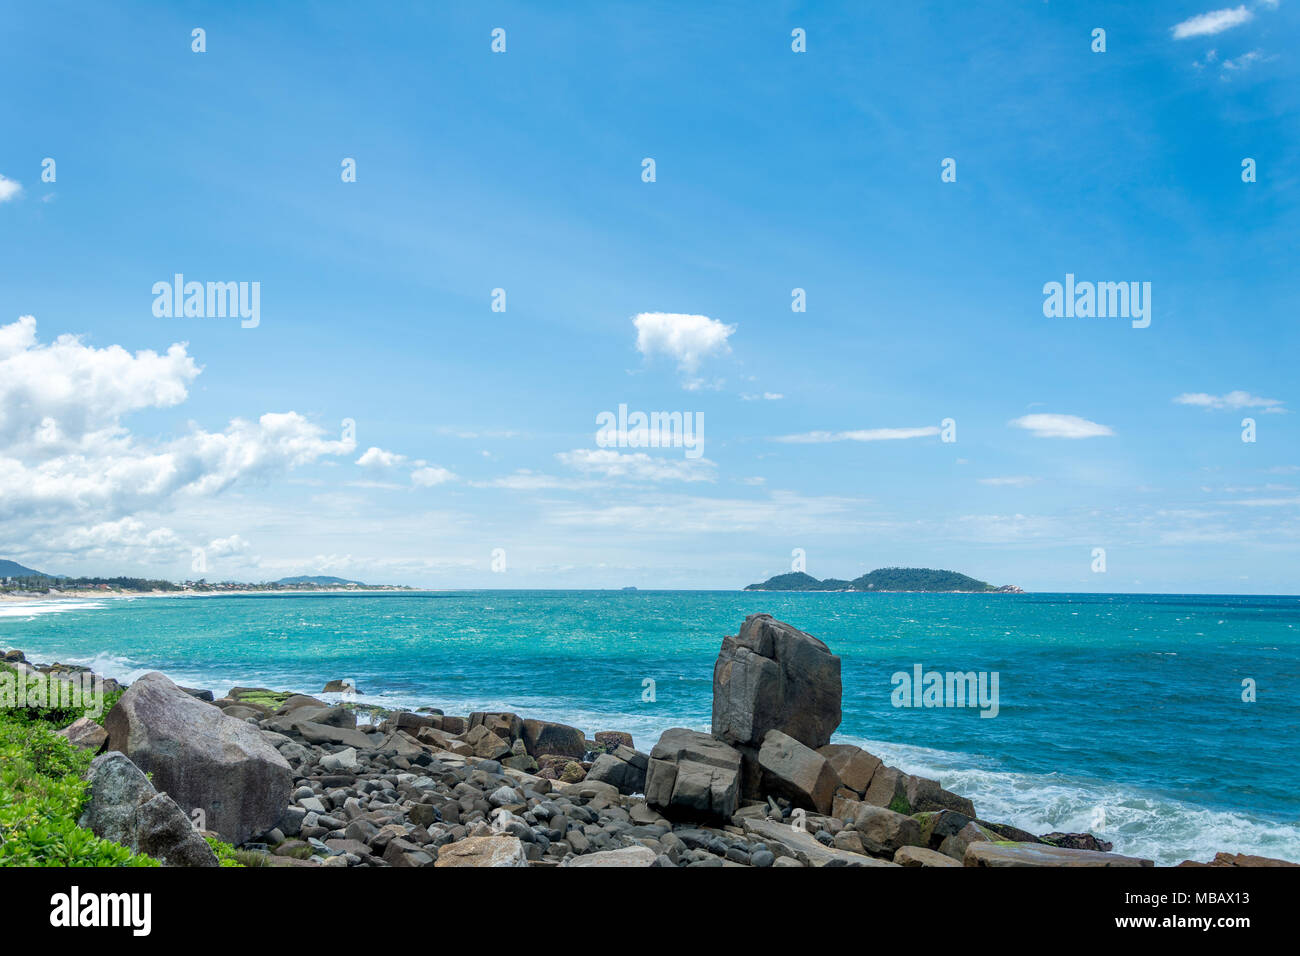 Florianopolis, Brazil. February, 2018. Sea and rocky region at the south of the island. At the backside of the image, the Campeche Island (Ilha do Cam Stock Photo